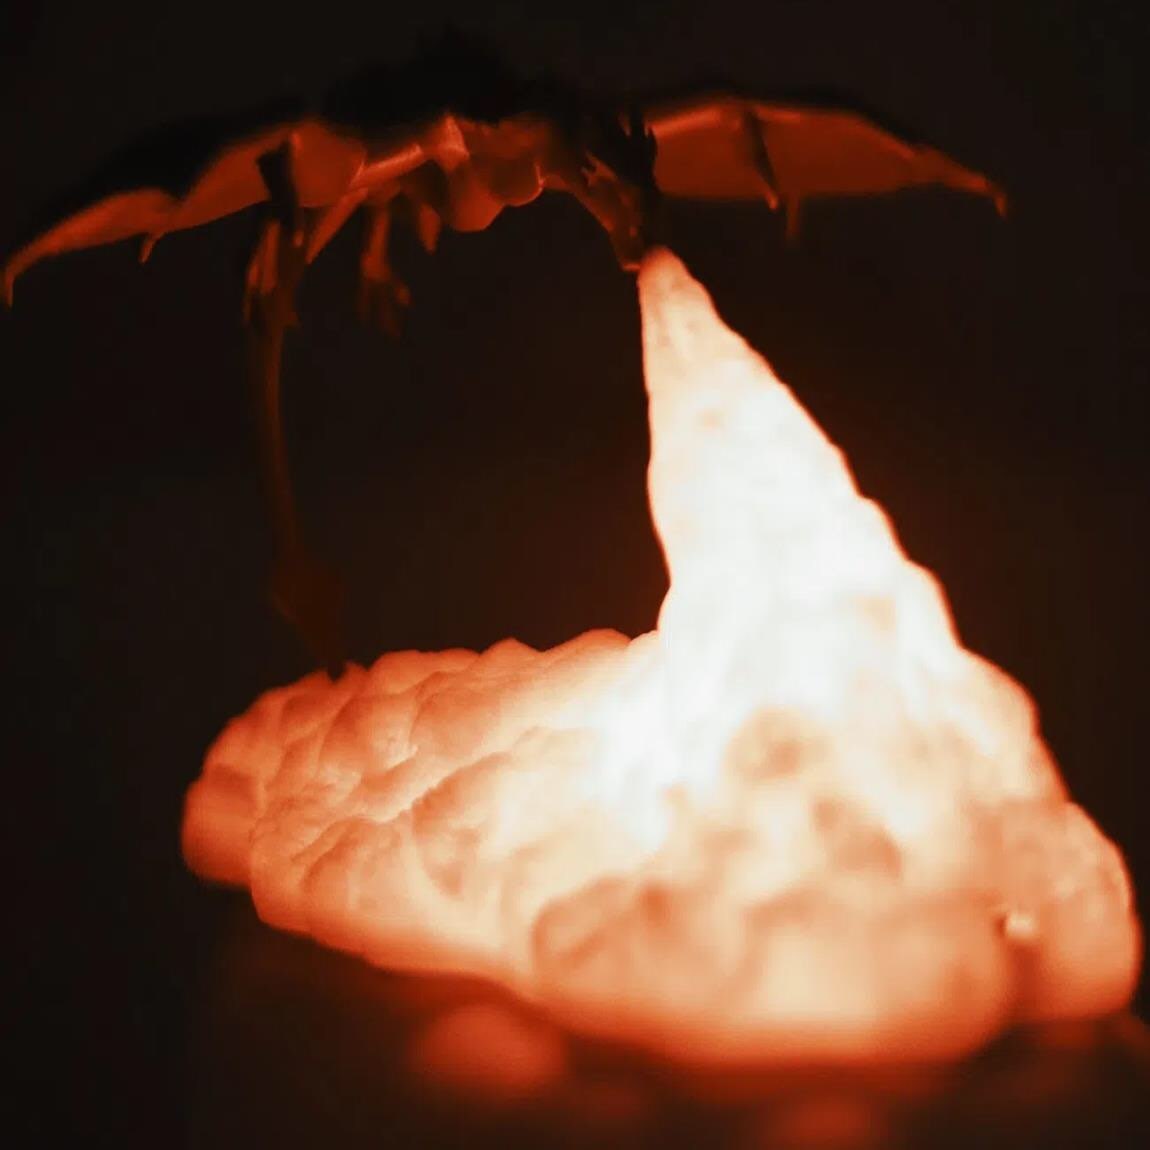 3D Printed Led Dragon Lamps photo review